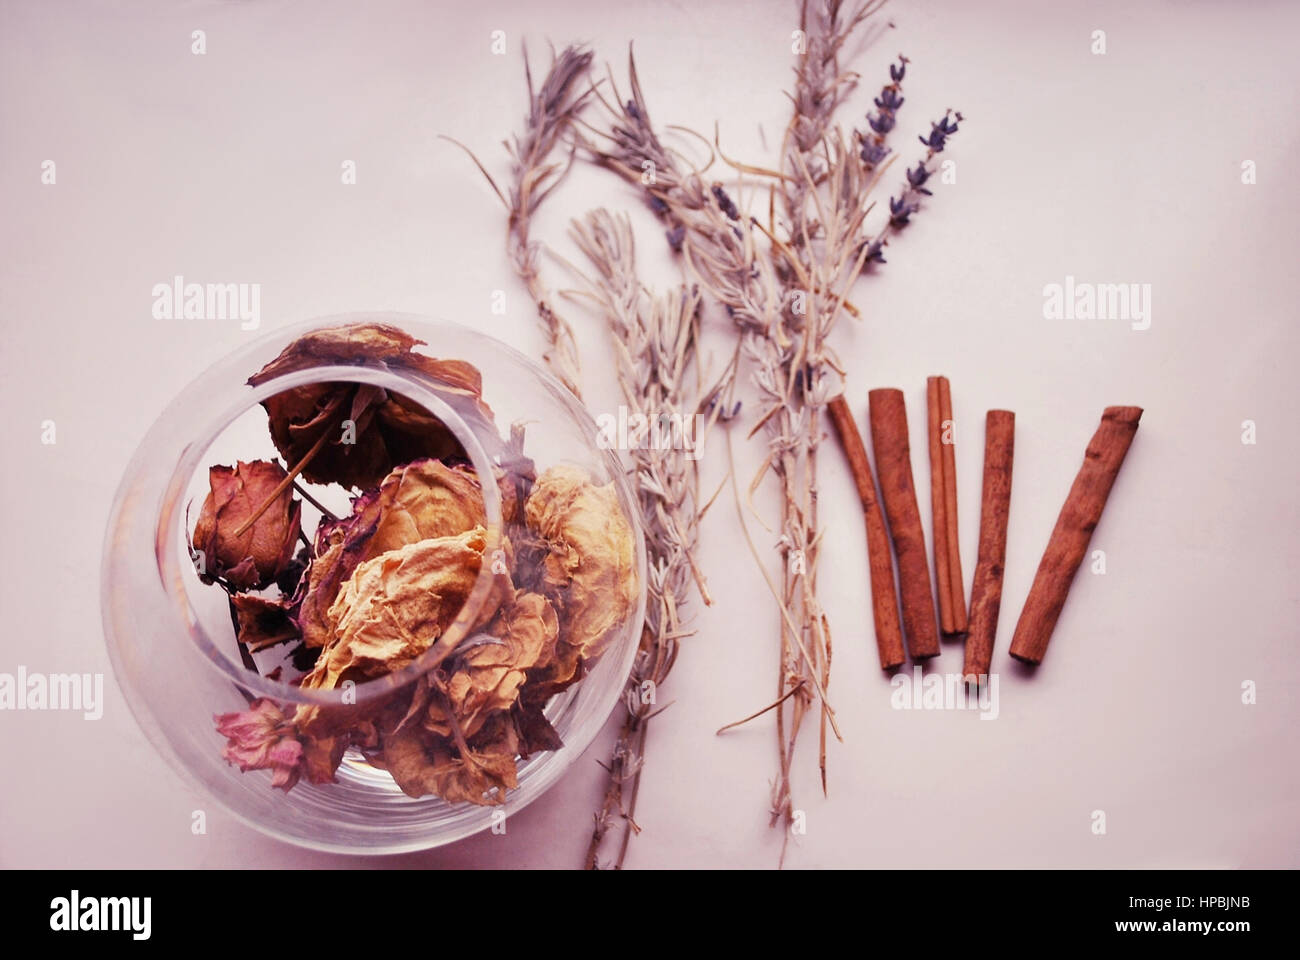 Cinnamon, lavender and dried roses - smells of summer. Stock Photo